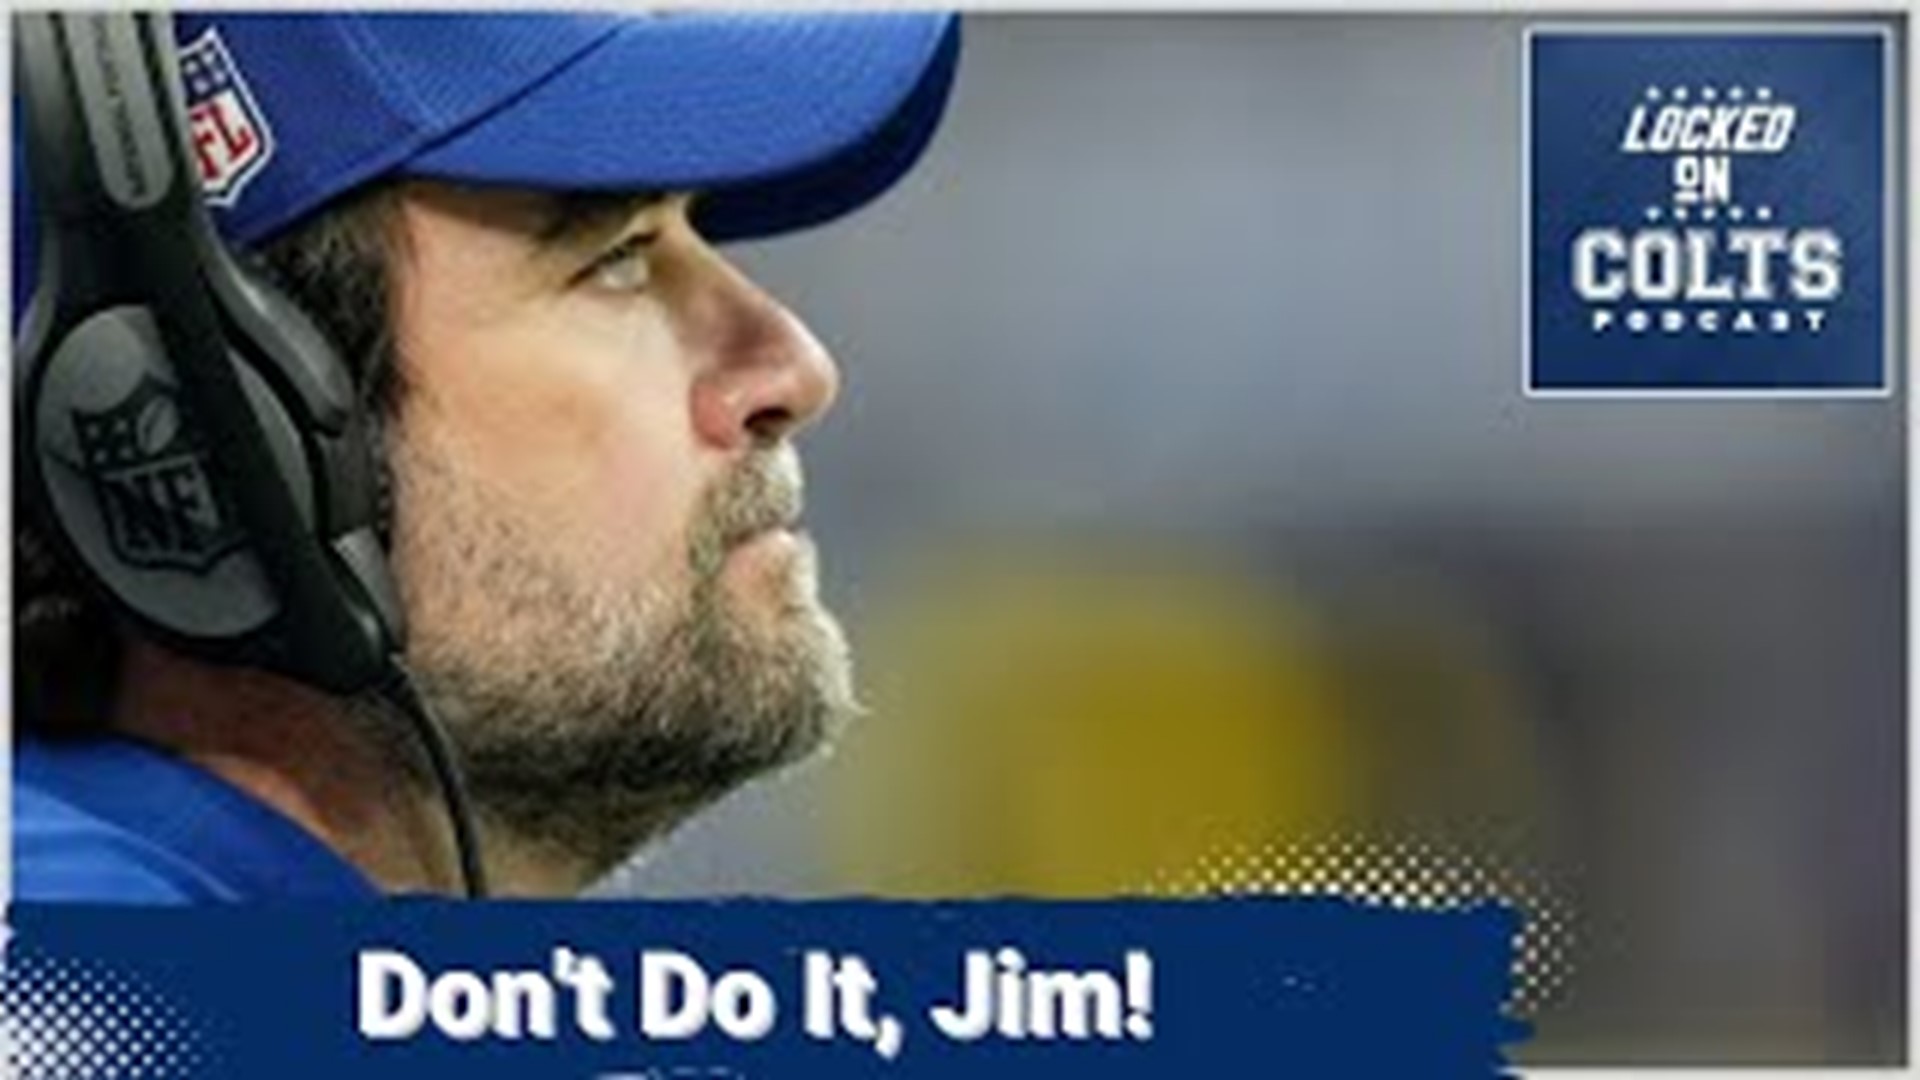 Jeff Saturday continues to come up as a possibility for the Indianapolis Colts' head coaching role, but owner Jim Irsay can't really do it, can he?